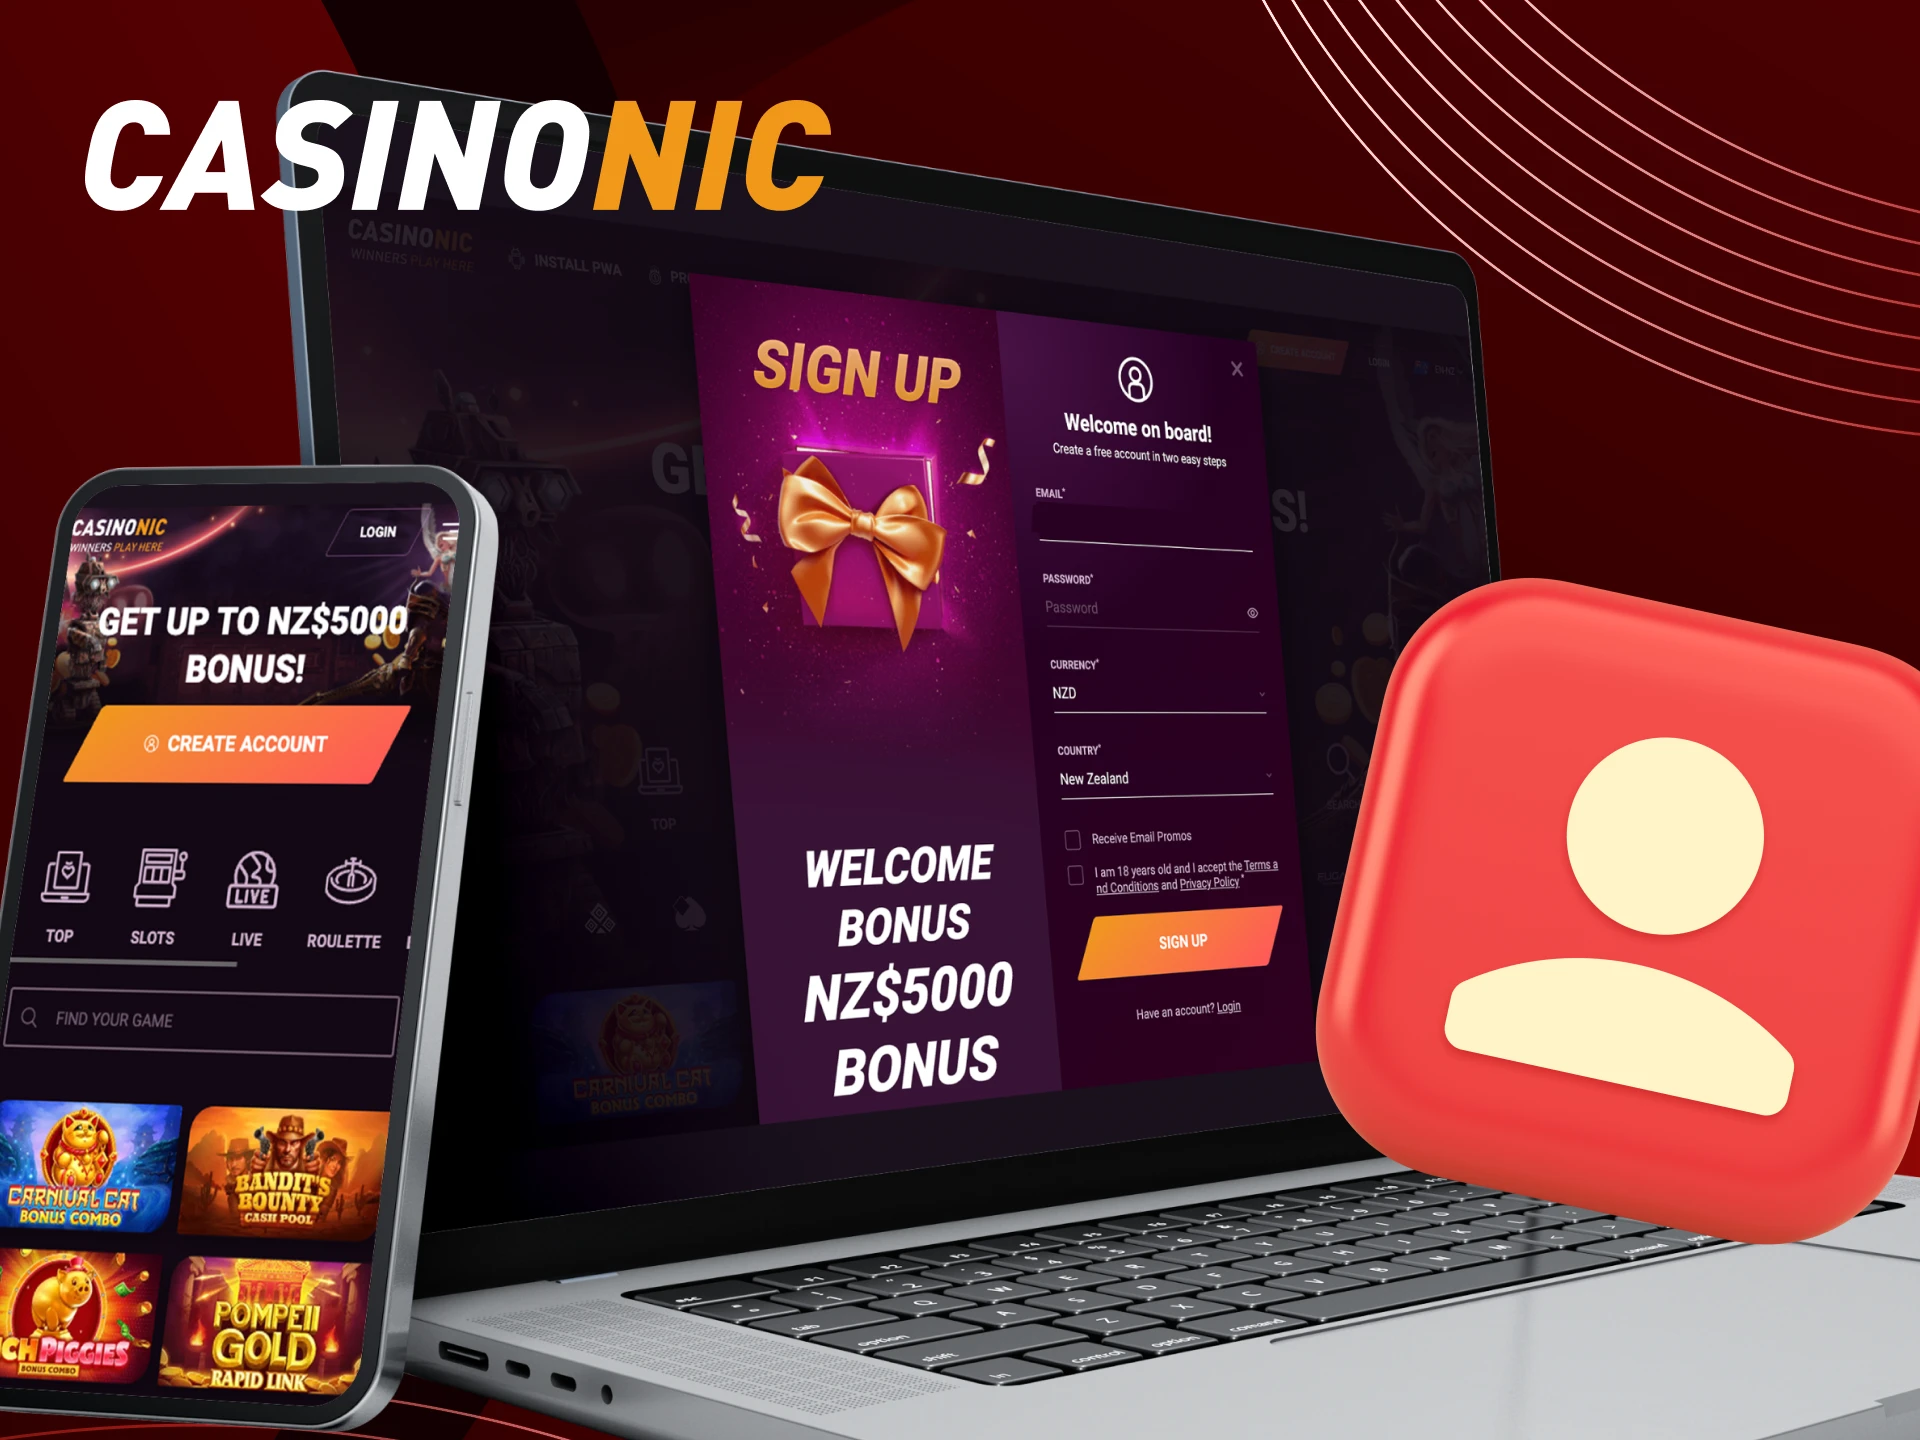 Instructions on how to create a new account in the online casino CasinoNic.